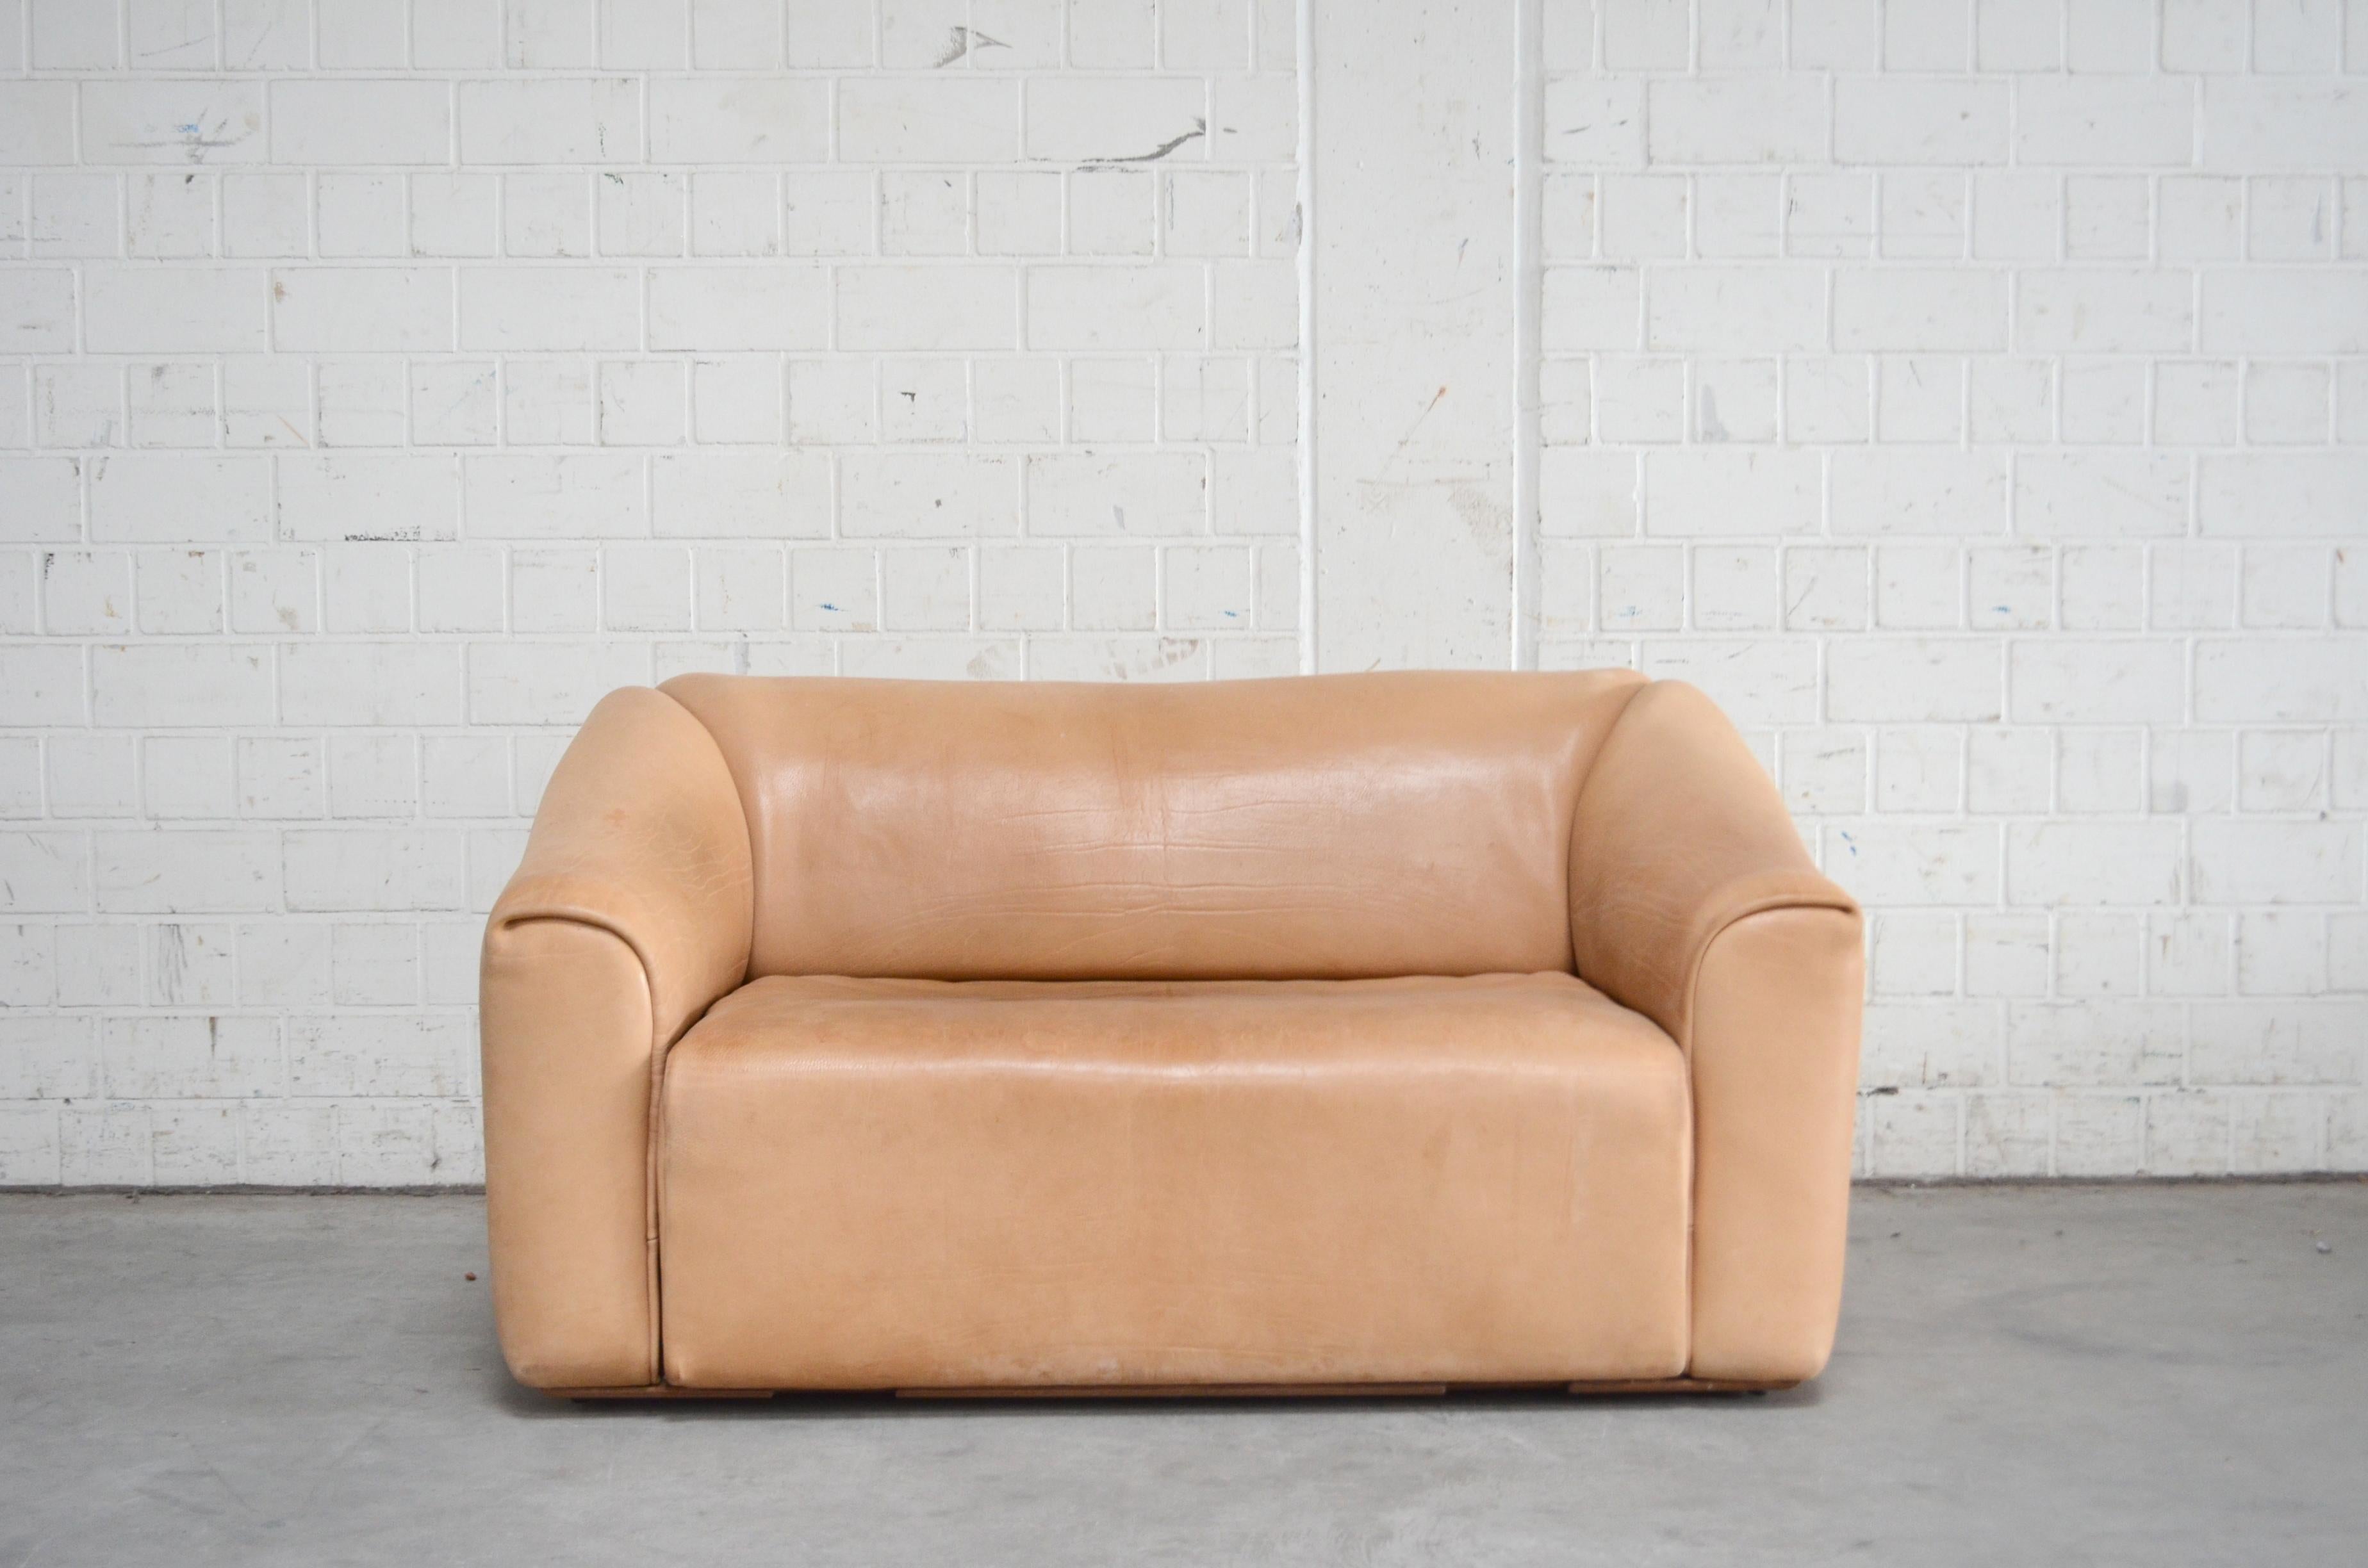 De Sede DS 47 / 02 neck leather sofa.
It´s the small loveseat Sofa.
This DS-47 sofa was manufactured in Switzerland by De Sede and is upholstered in 3-5 mm thick, natural hide.
The leather colour is beautiful with name cocos
and has some little